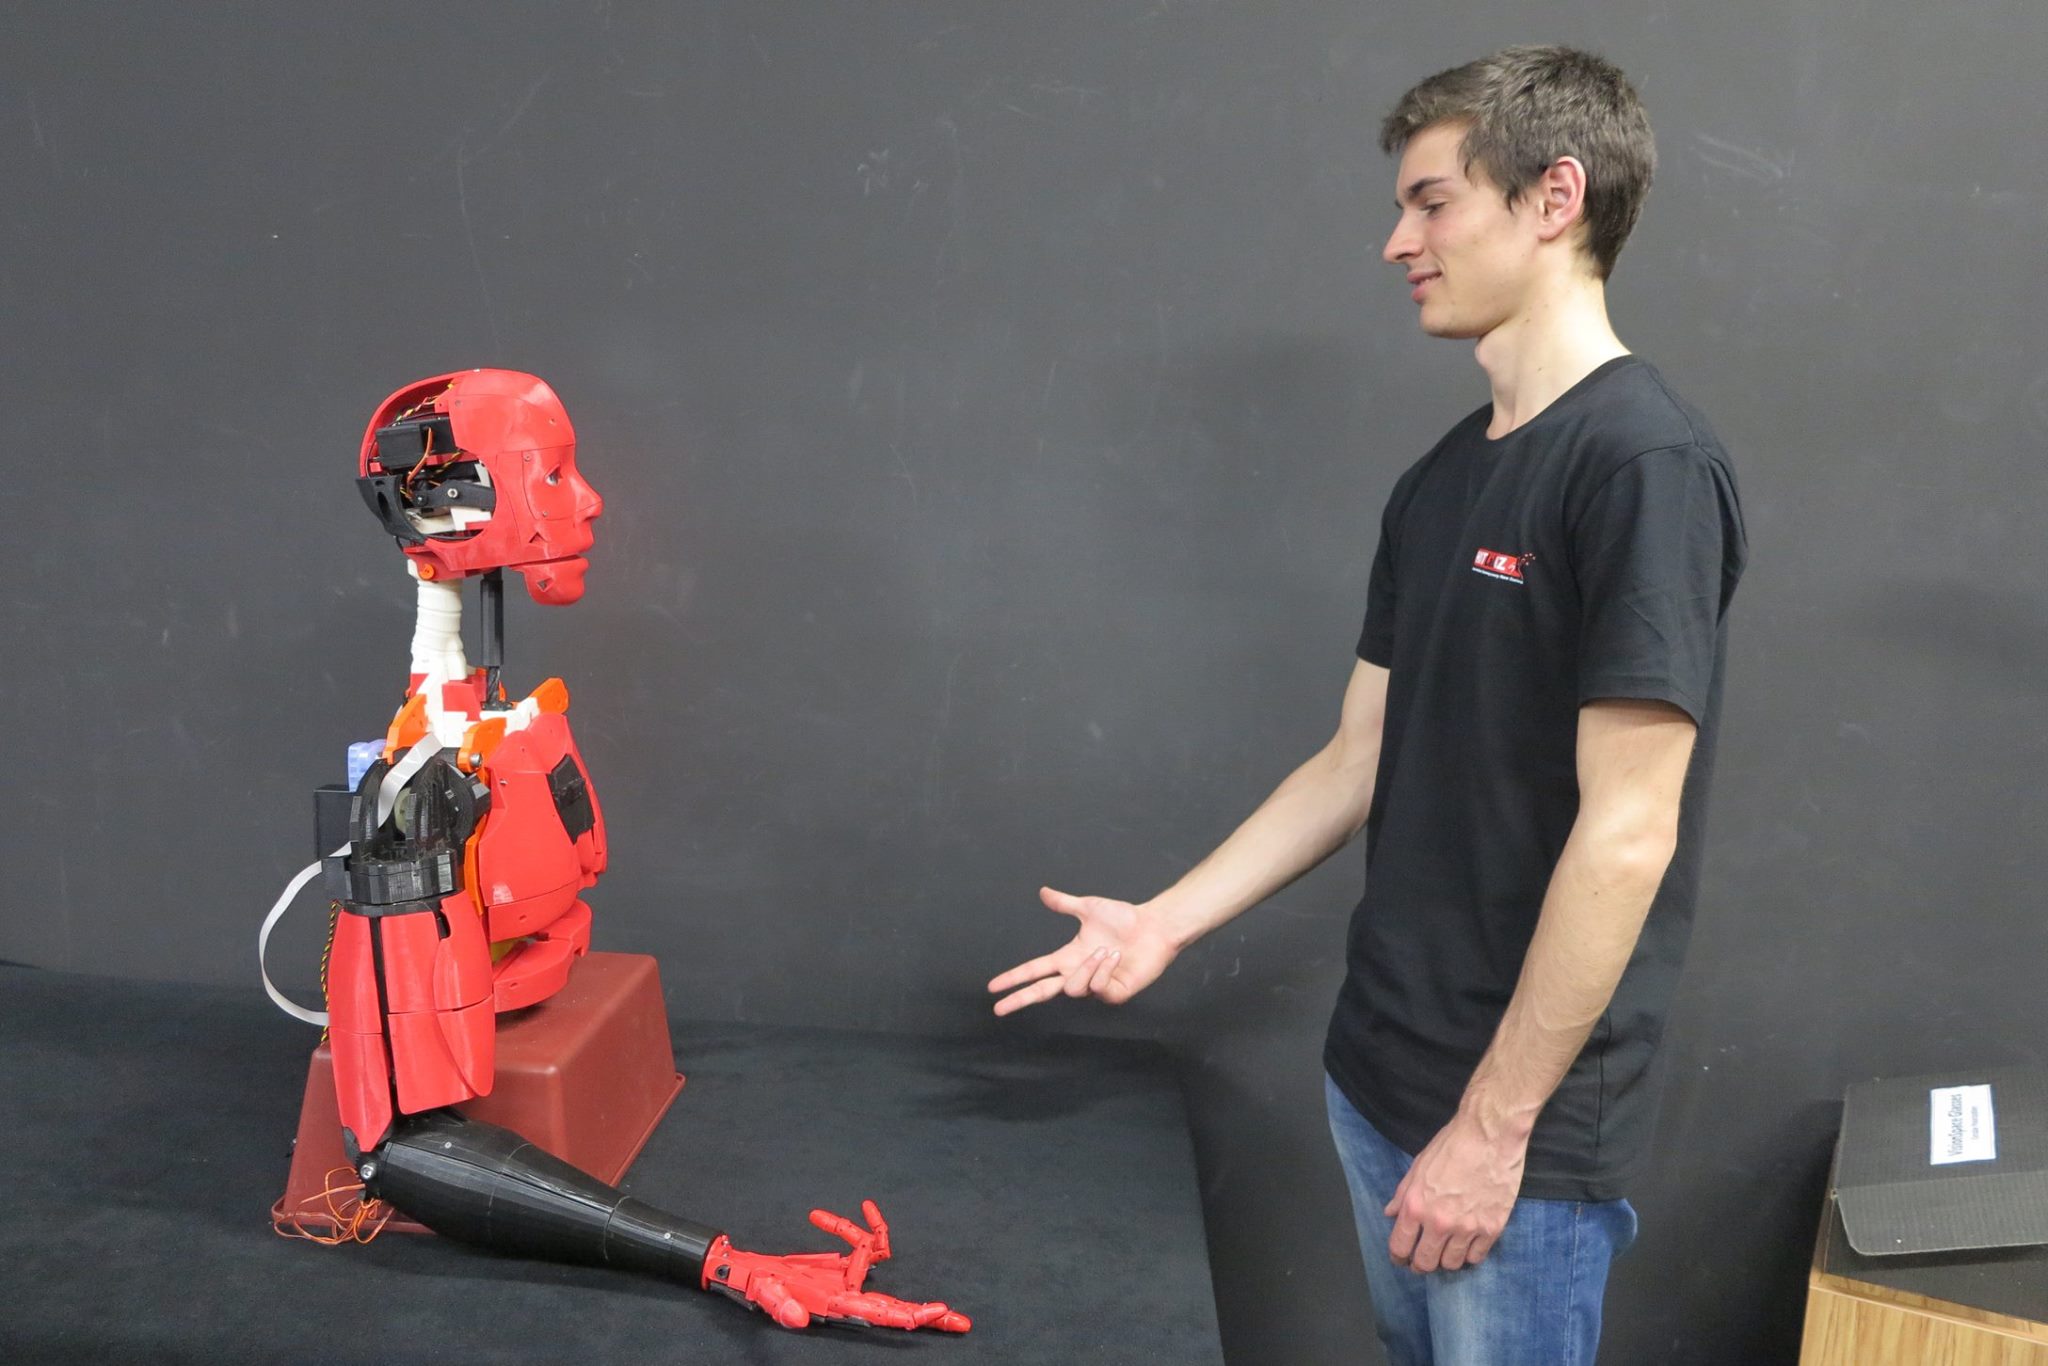 New Zealand Herald reports on our 3D printed robot project